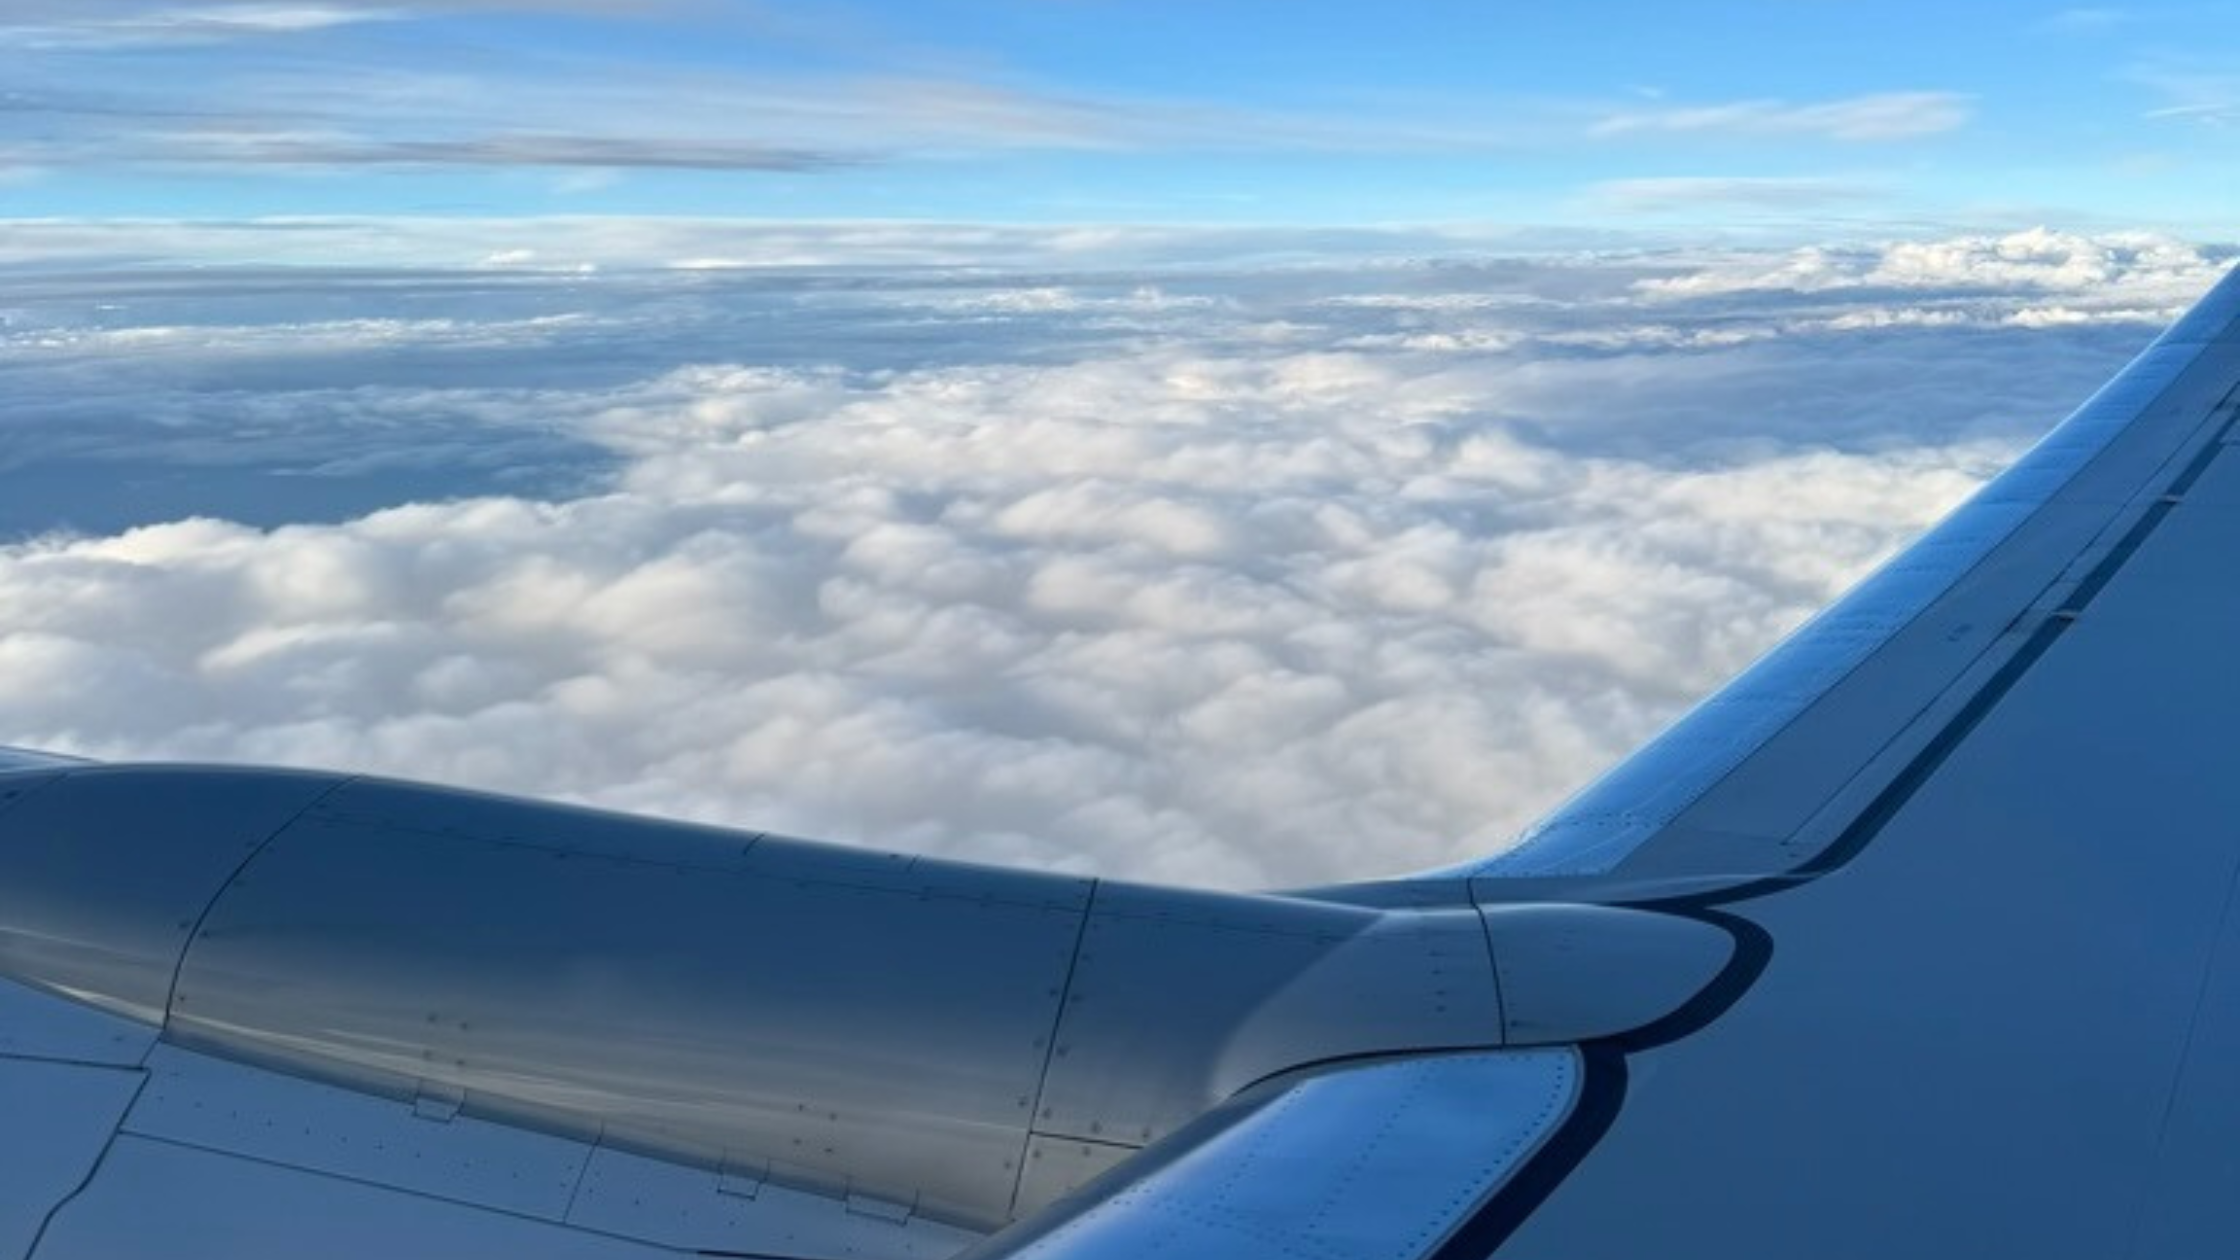 Aeroplane wing, blue sky and clouds